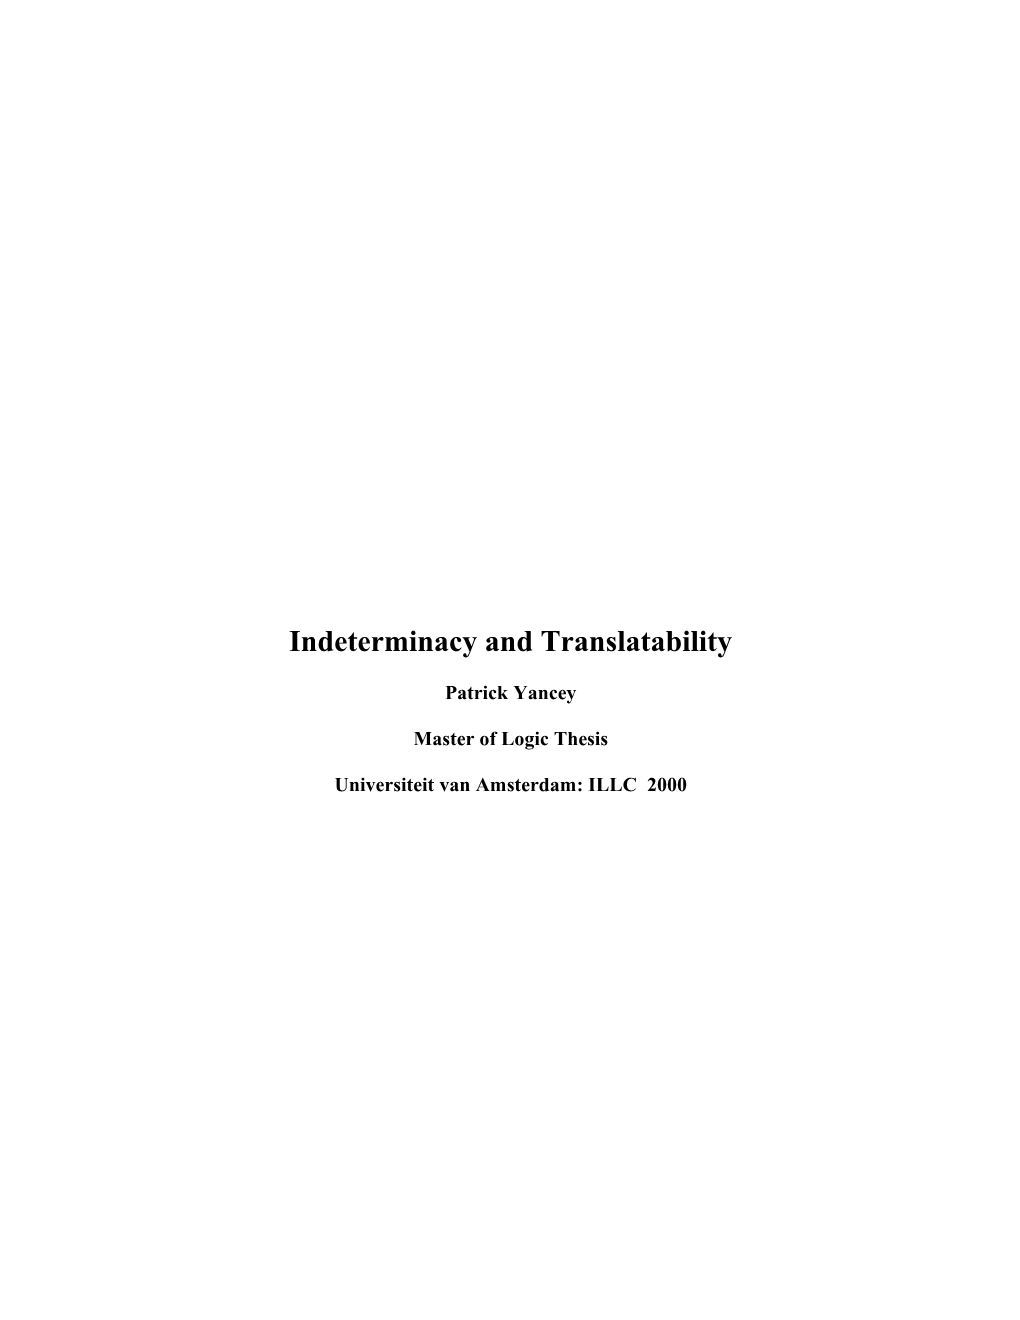 Introduction of Indeterminacy